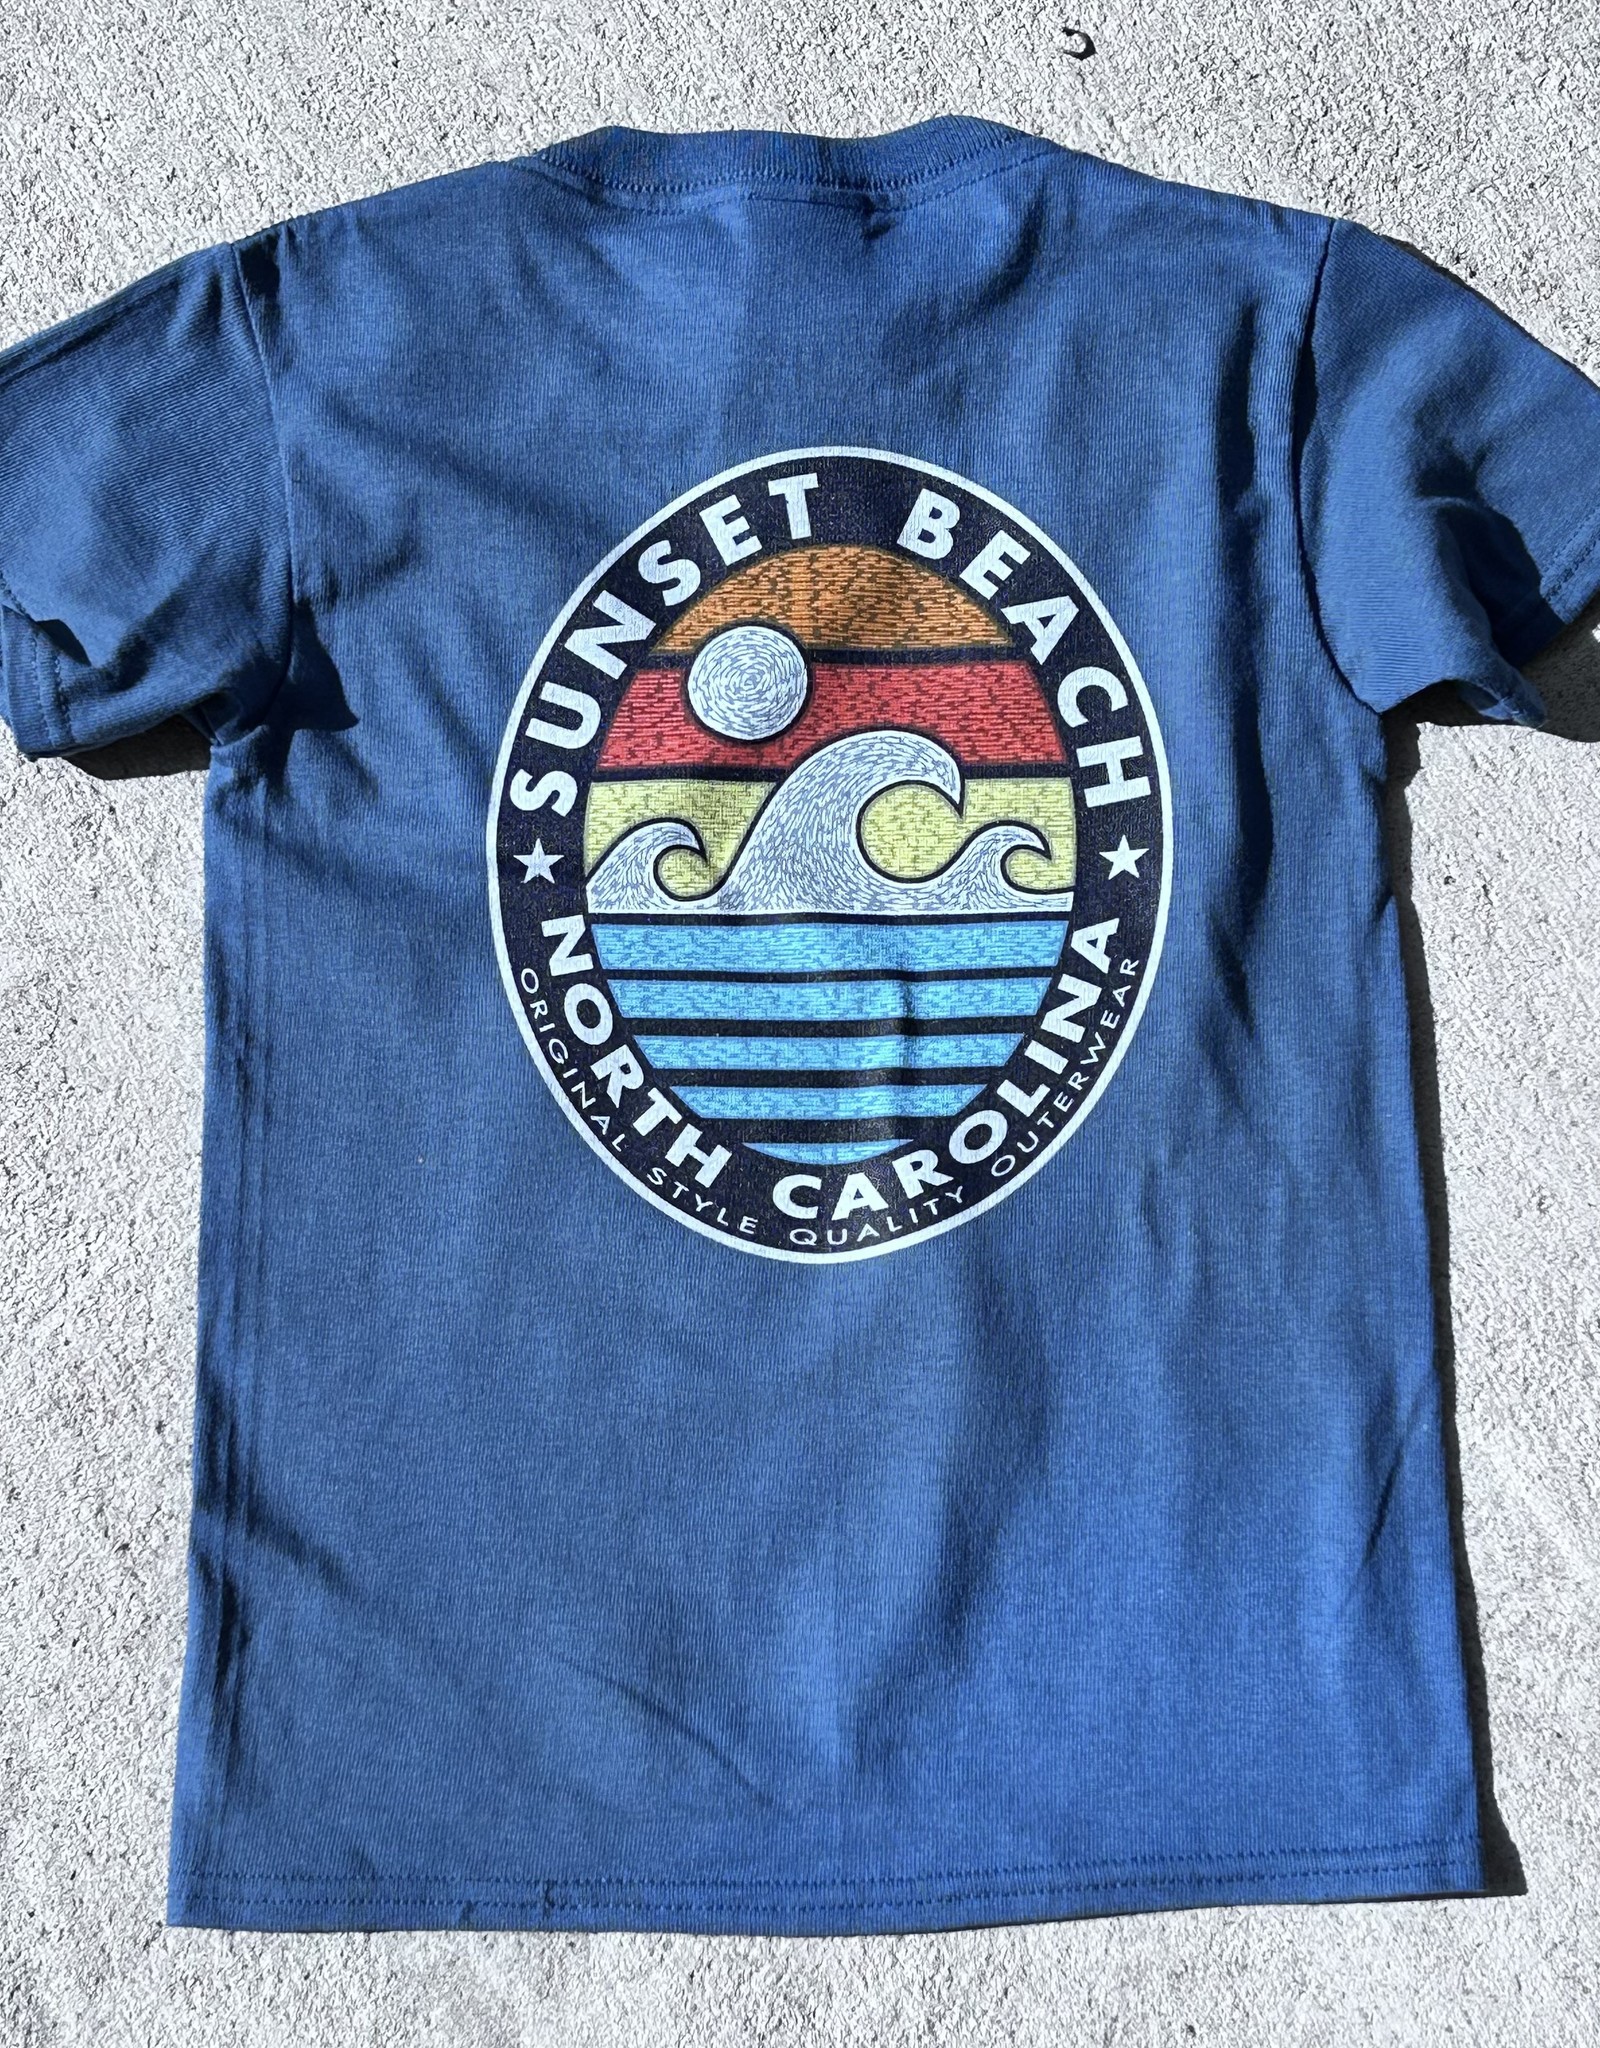 CLEARANCE ITEMS ALONG THE LINES WAVE KIDS TEE